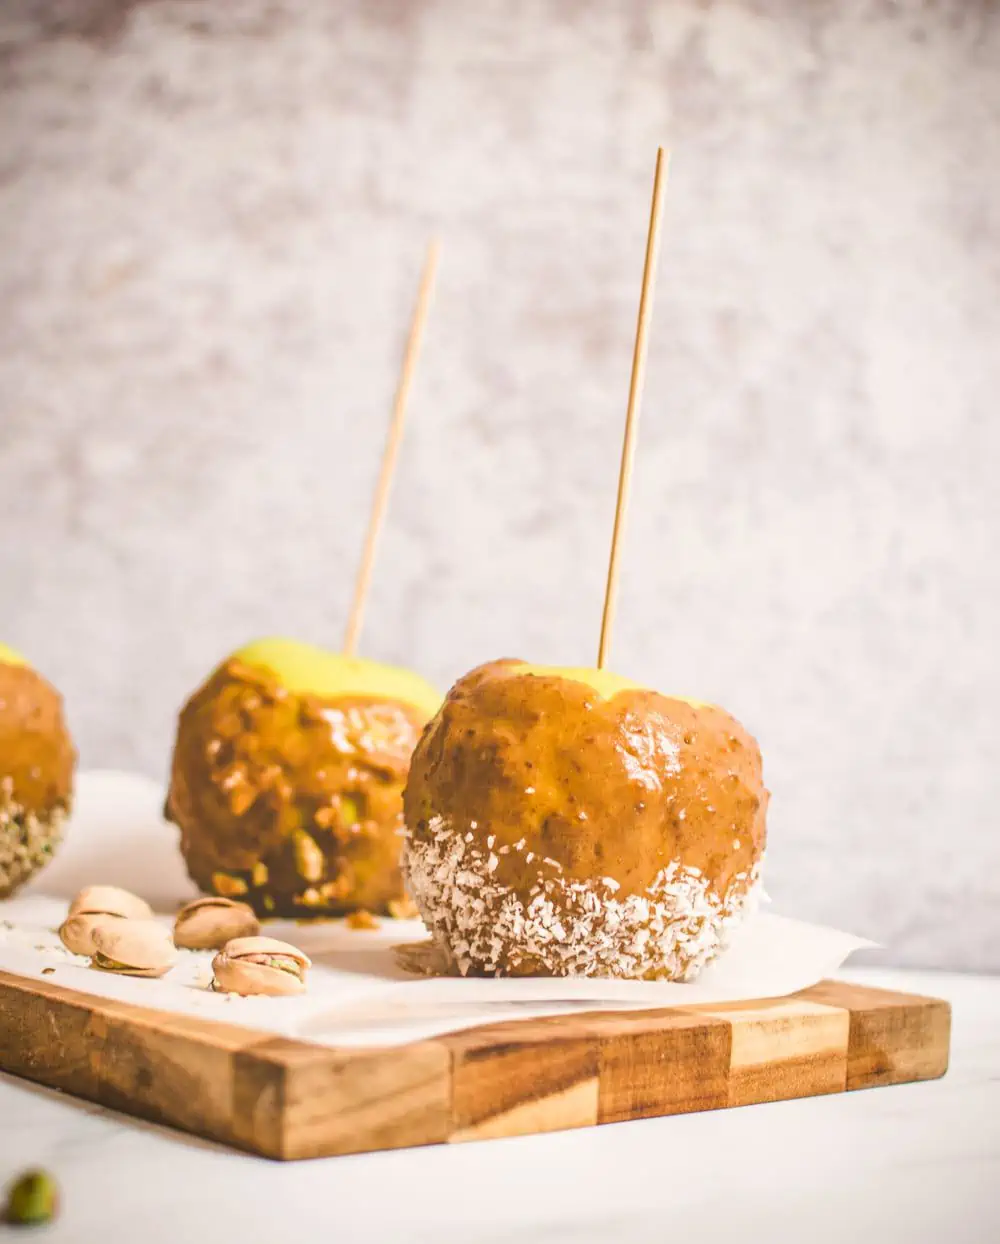 Homemade Vegan Caramel Apples on sticks on a boars with Pistachios